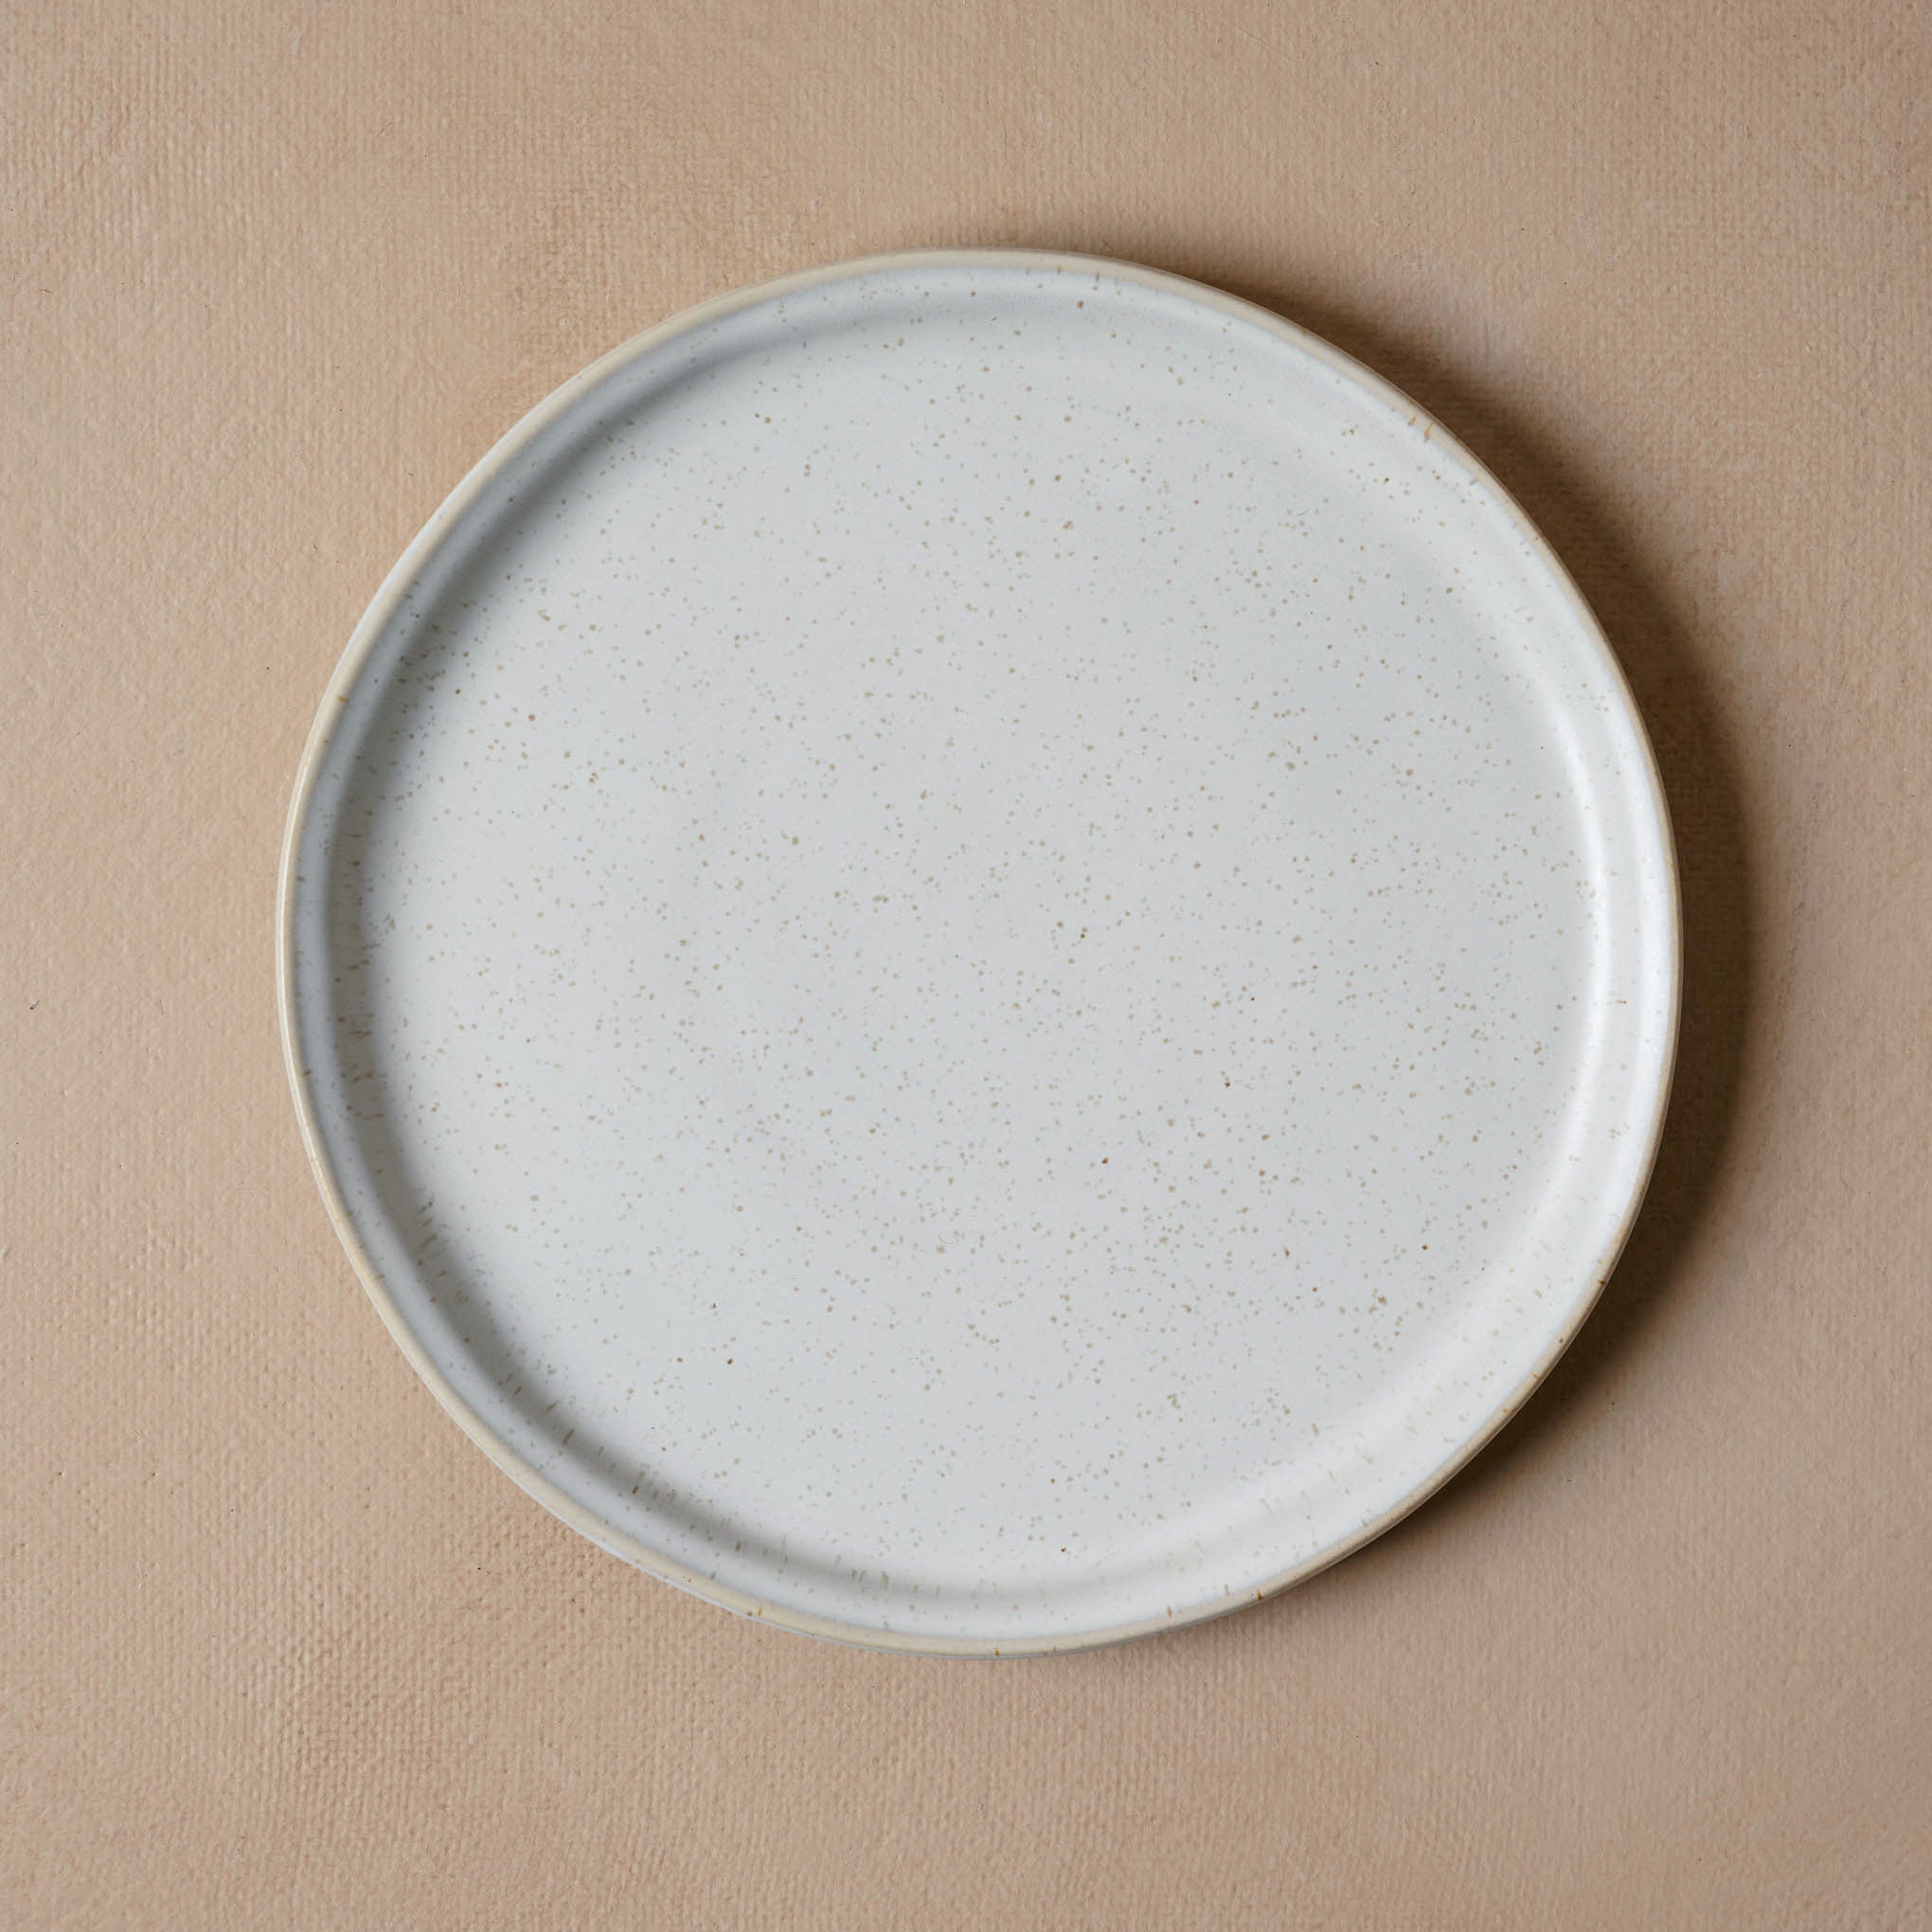 French Grey Plate - salad Items range from $12.00 to $16.00